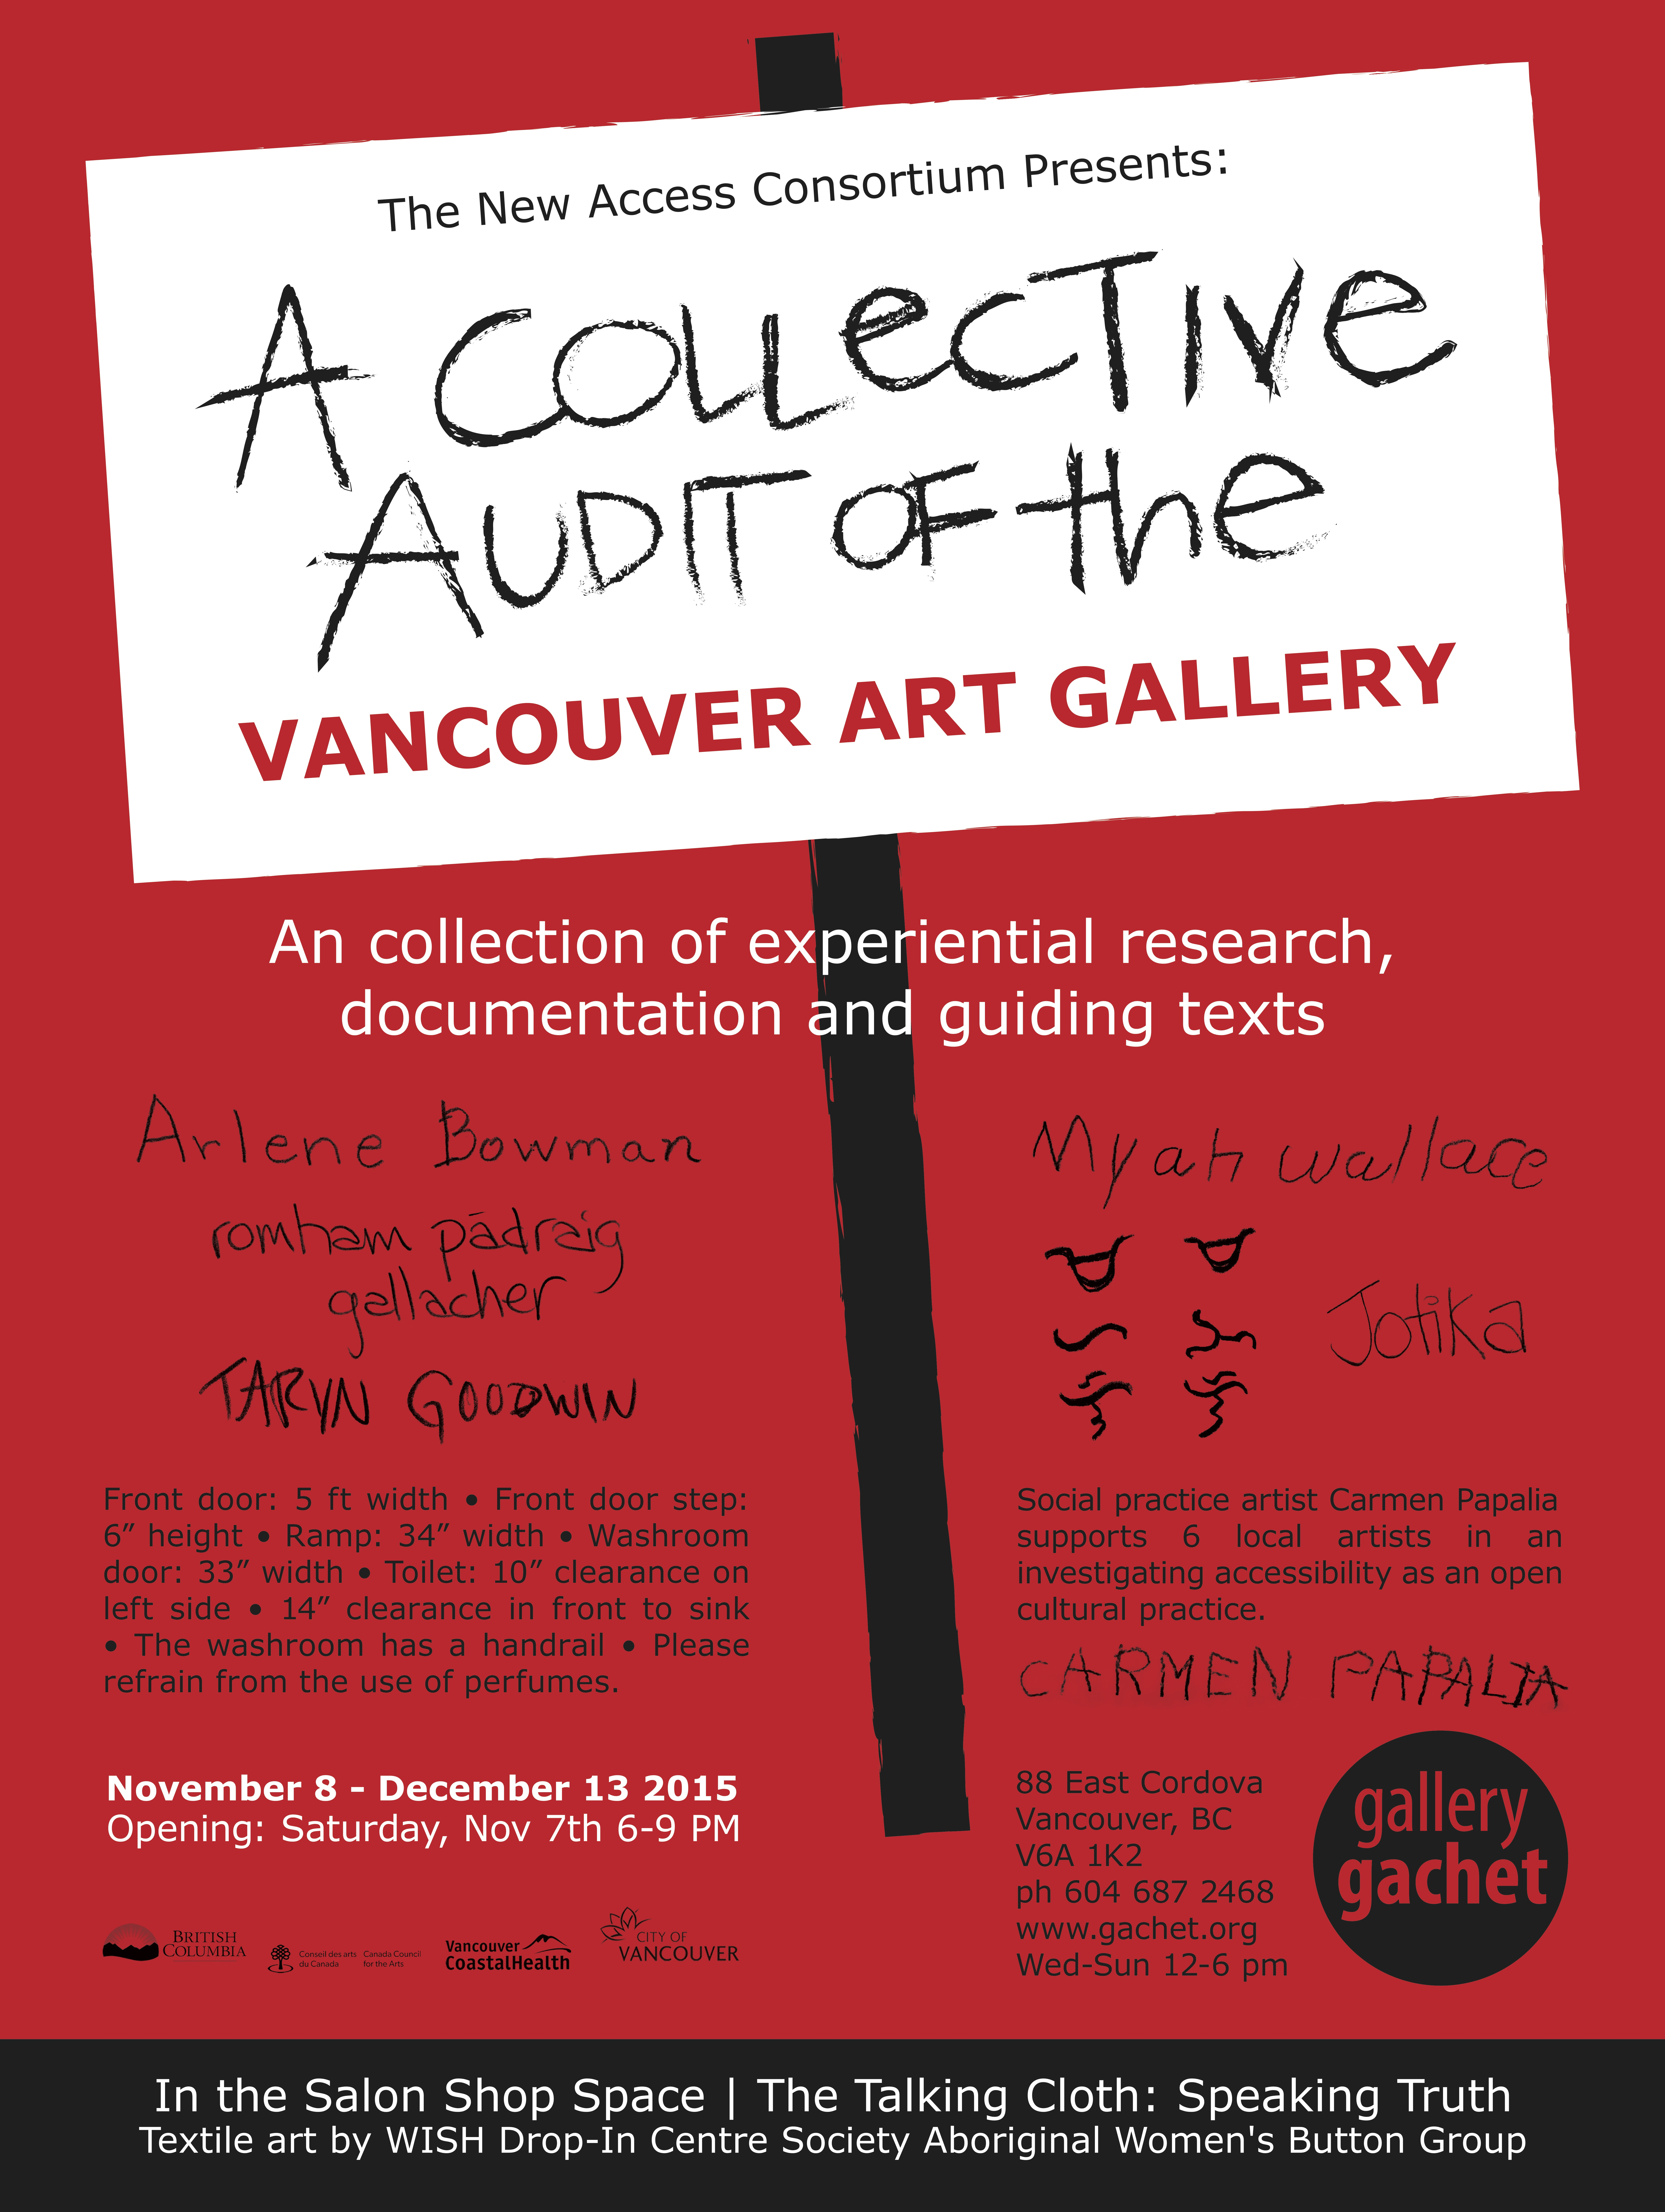 the-new-access-consortium-exhibition-poster-gallery-gachet-vancouver-bc